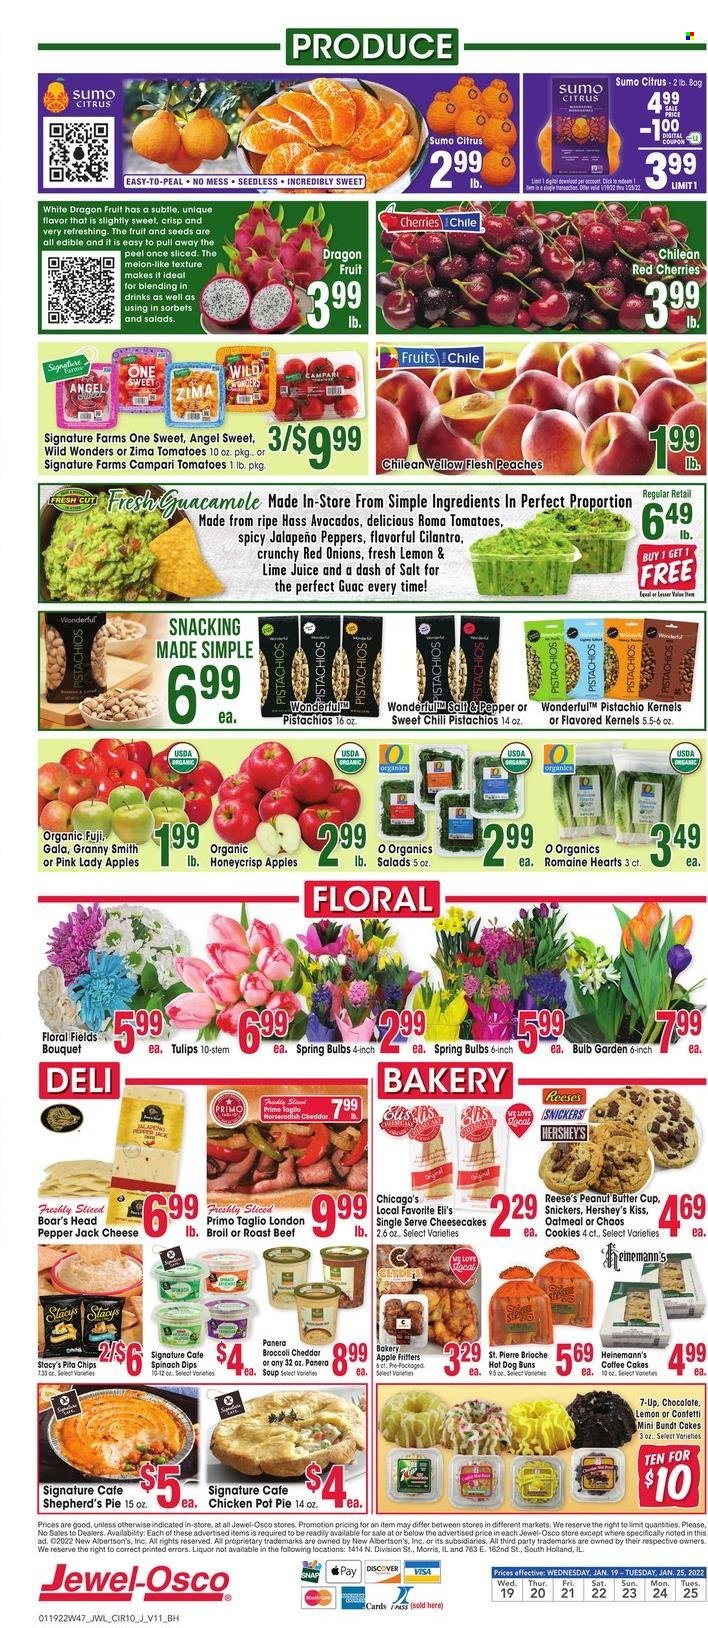 thumbnail - Jewel Osco Flyer - 01/19/2022 - 01/25/2022 - Sales products - cake, buns, brioche, bundt, pot pie, red onions, jalapeño, apples, avocado, Gala, dragon fruit, Granny Smith, Pink Lady, soup, Pepper Jack cheese, cheese, Reese's, Hershey's, cookies, chocolate, Snickers, peanut butter cups, oatmeal, cilantro, peanut butter, pistachios, 7UP, tea, beef meat, roast beef, pot, cup, Bakers, tulip, bouquet, melons, peaches, sumo citrus. Page 10.